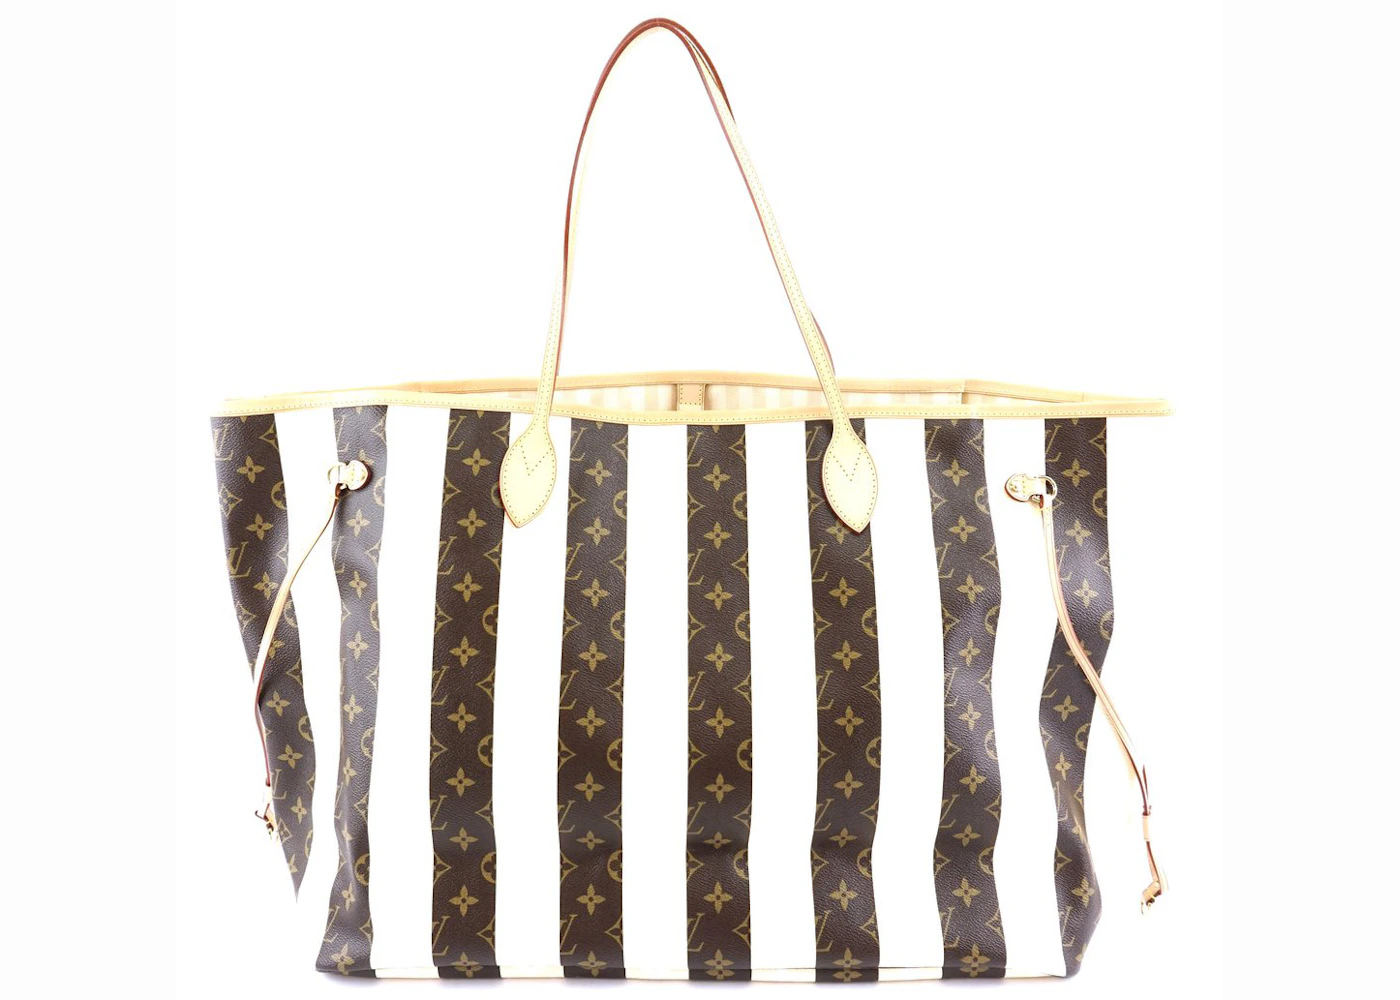 Louis Vuitton Neverfull Monogram Giant Jungle (Without Pouch) MM  Ivory/Havana Beige  Louis vuitton neverfull monogram, Louis vuitton  handbags neverfull, Louis vuitton handbags outlet